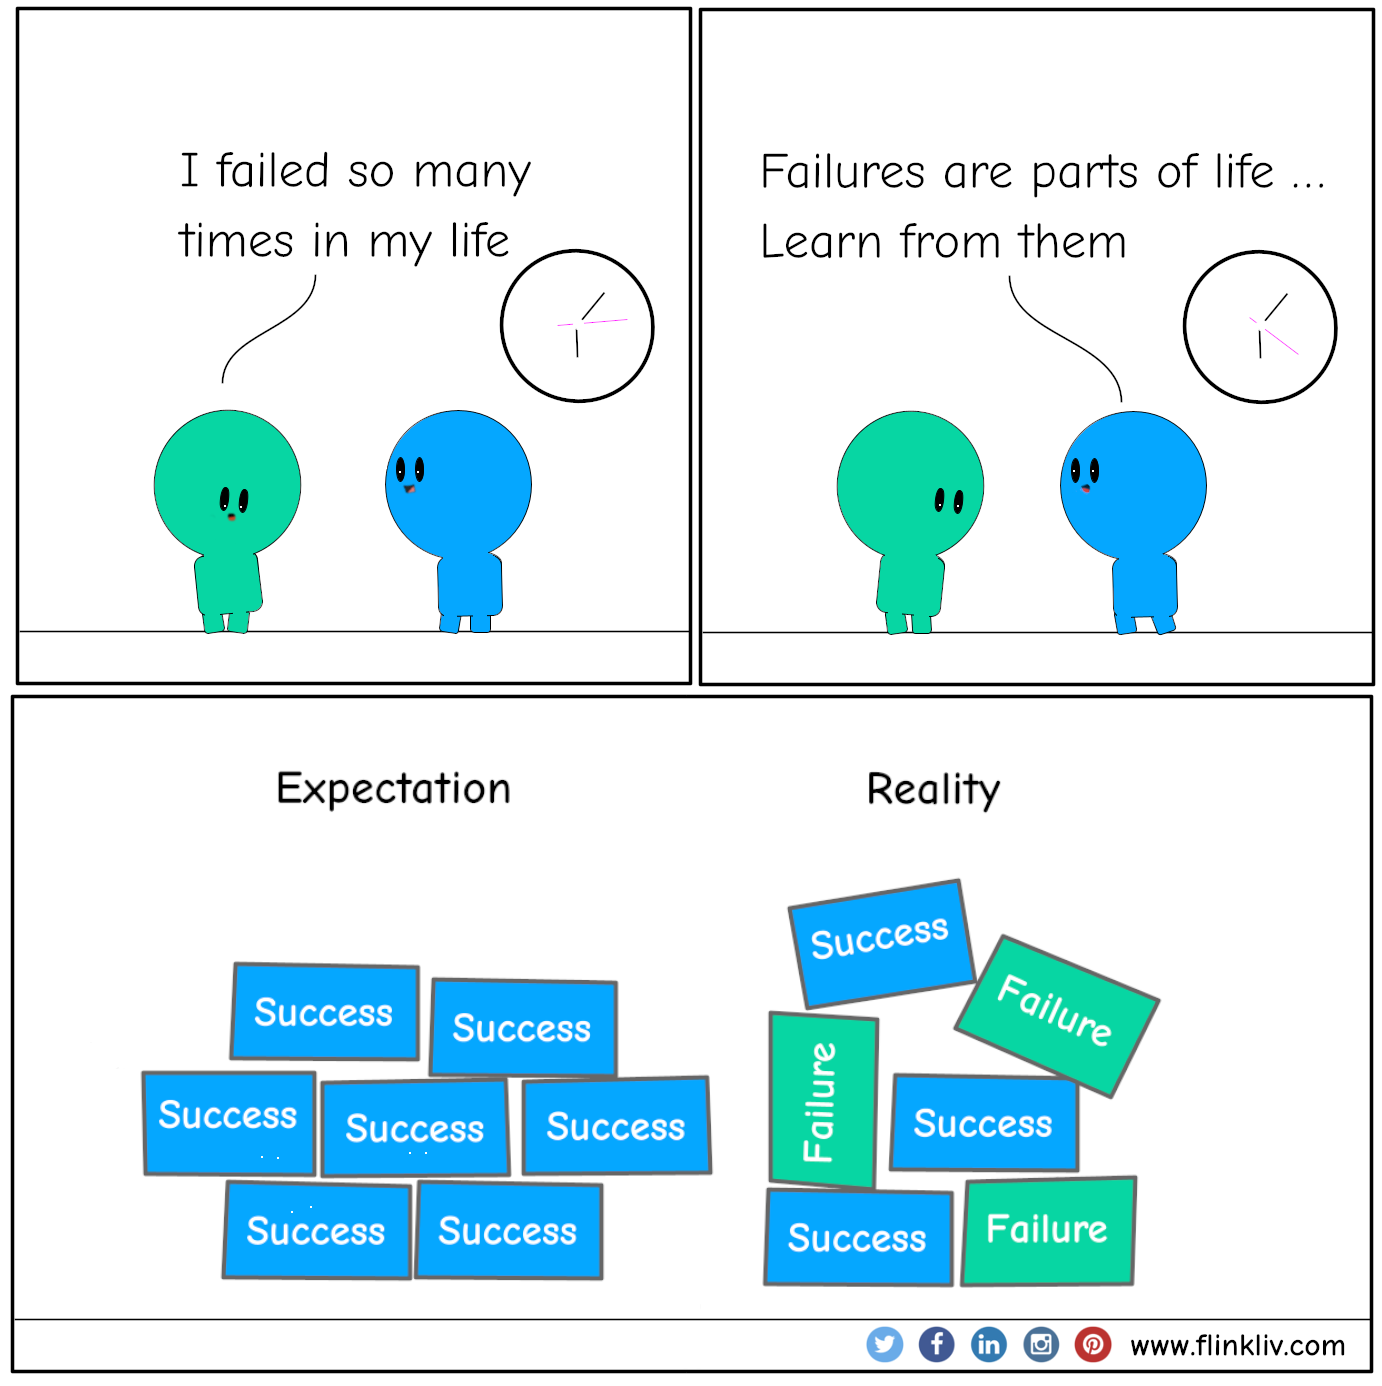  conversation between A and B to learn from failure.
    A: I failed so many times in my life.
    B: Failures are parts of life. Learn from them.
    By flinkliv.com